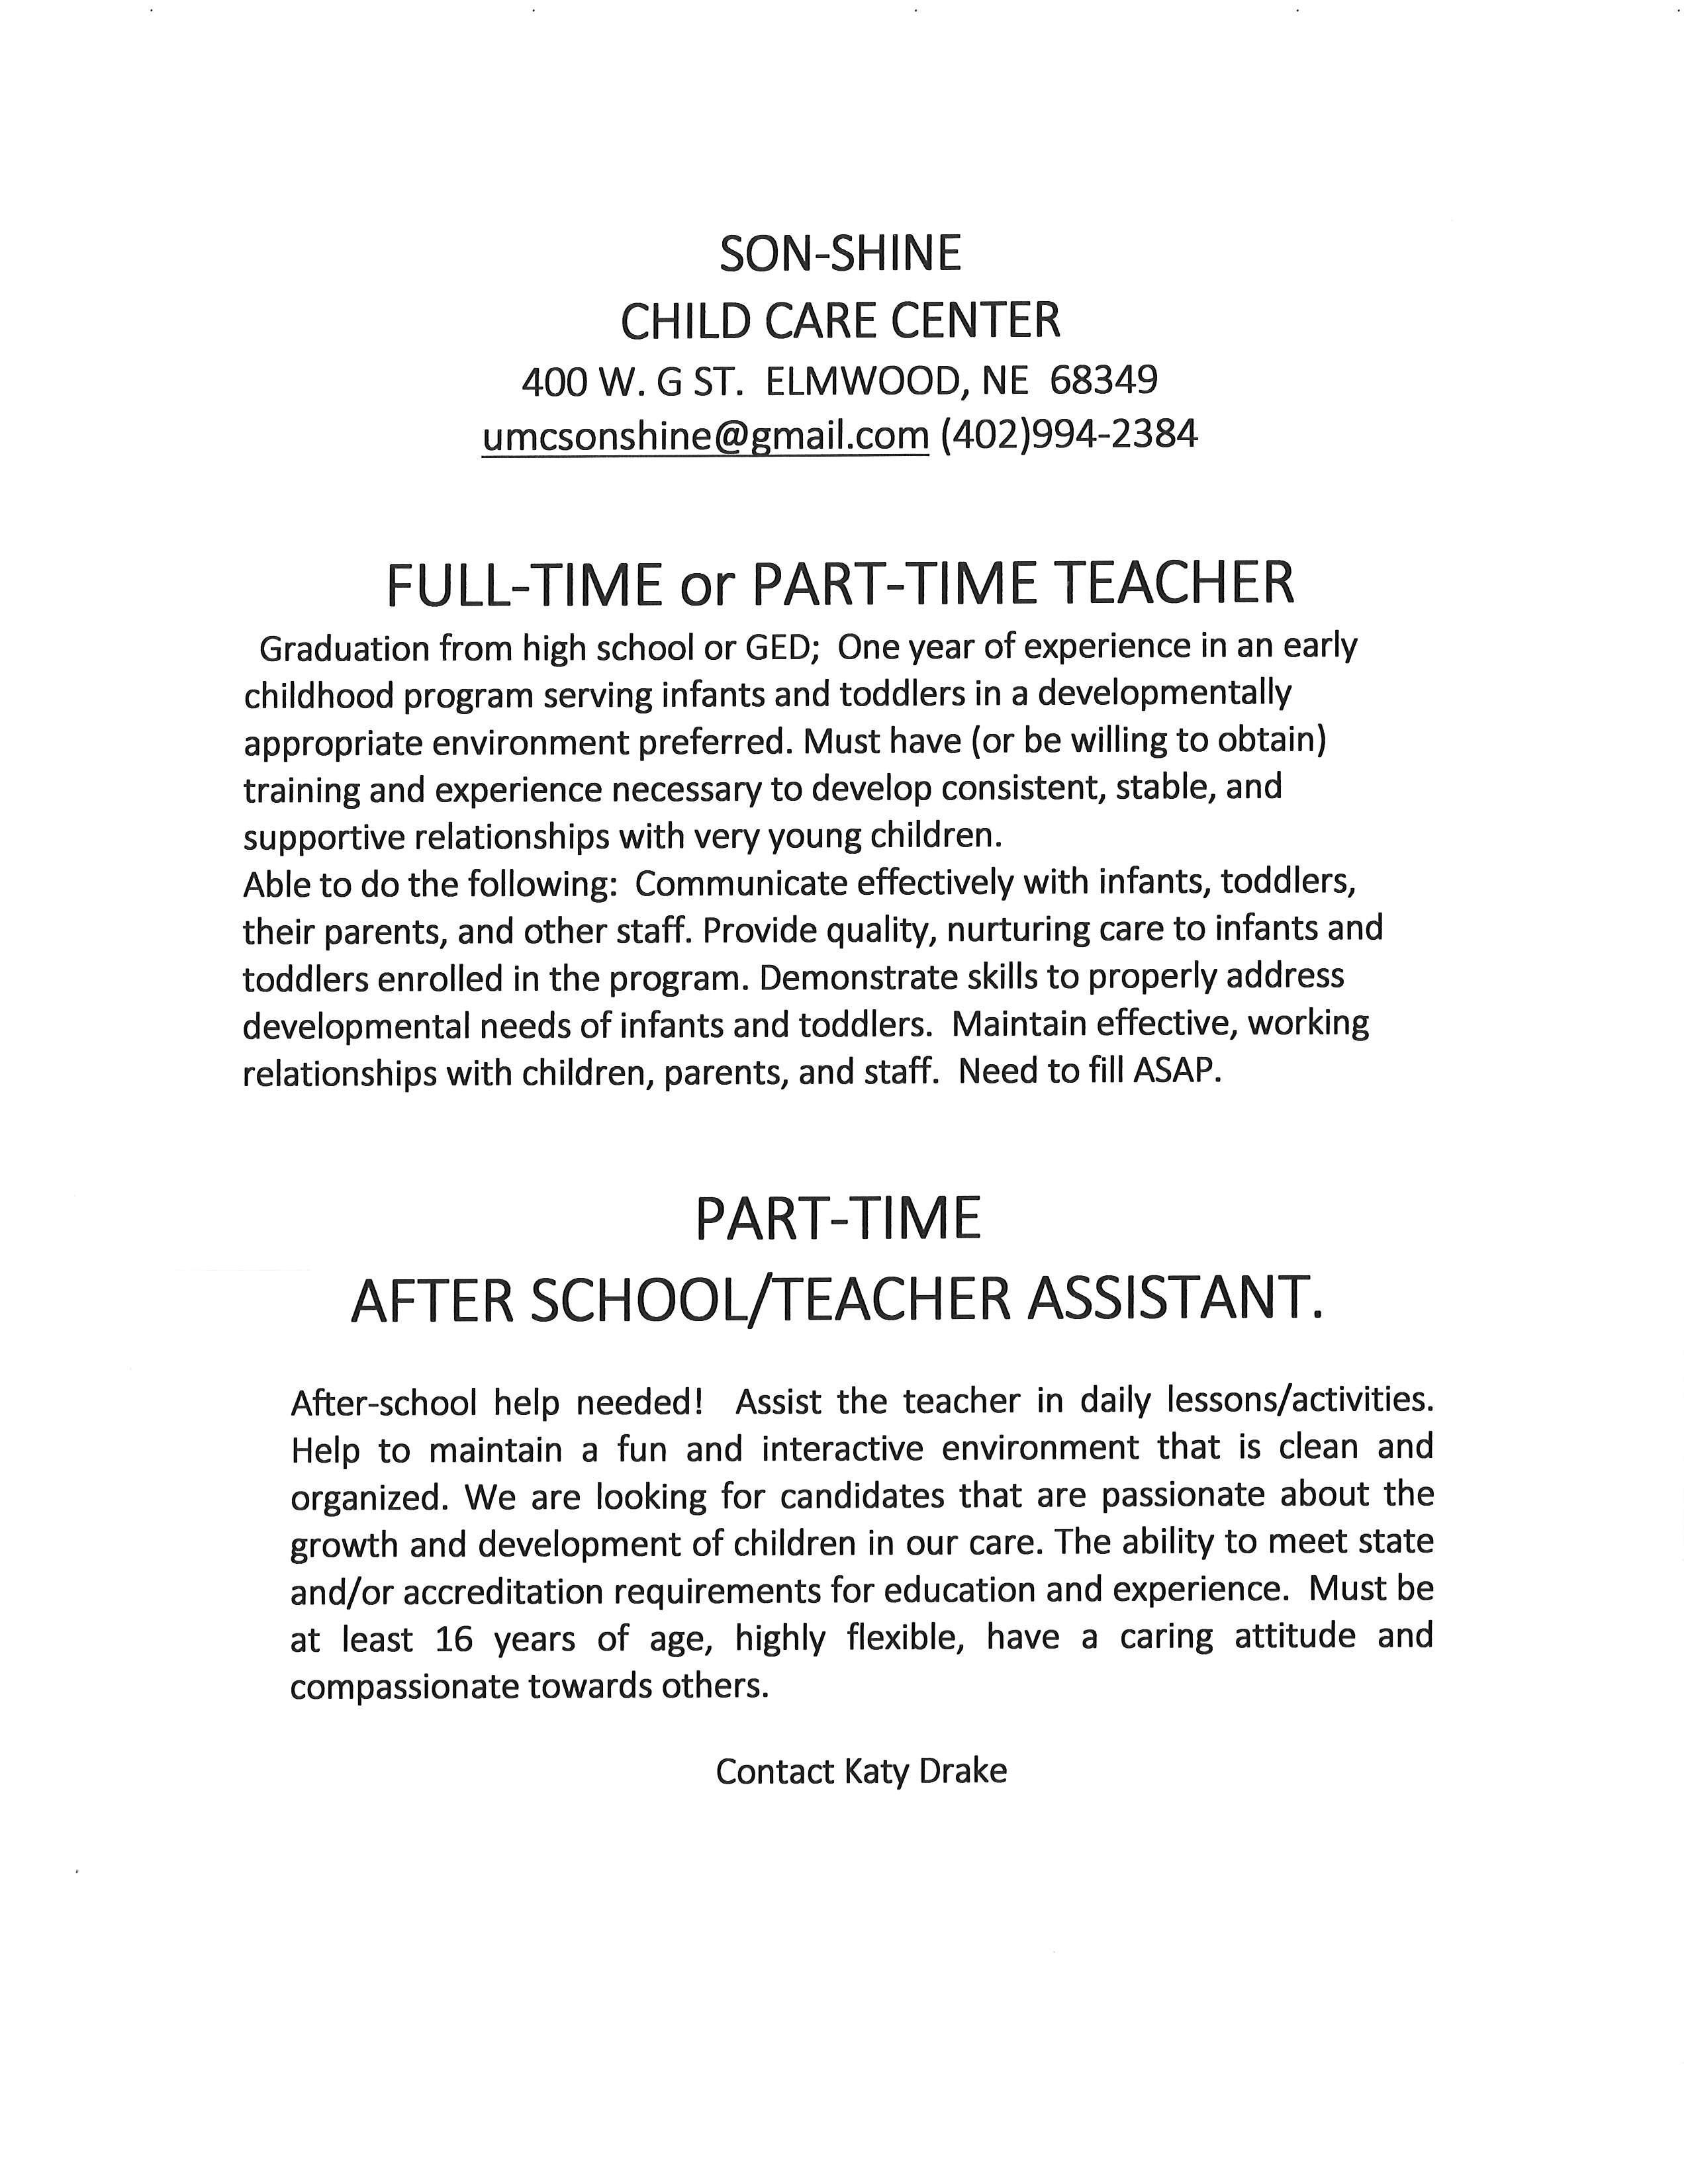 Jobs at Day care